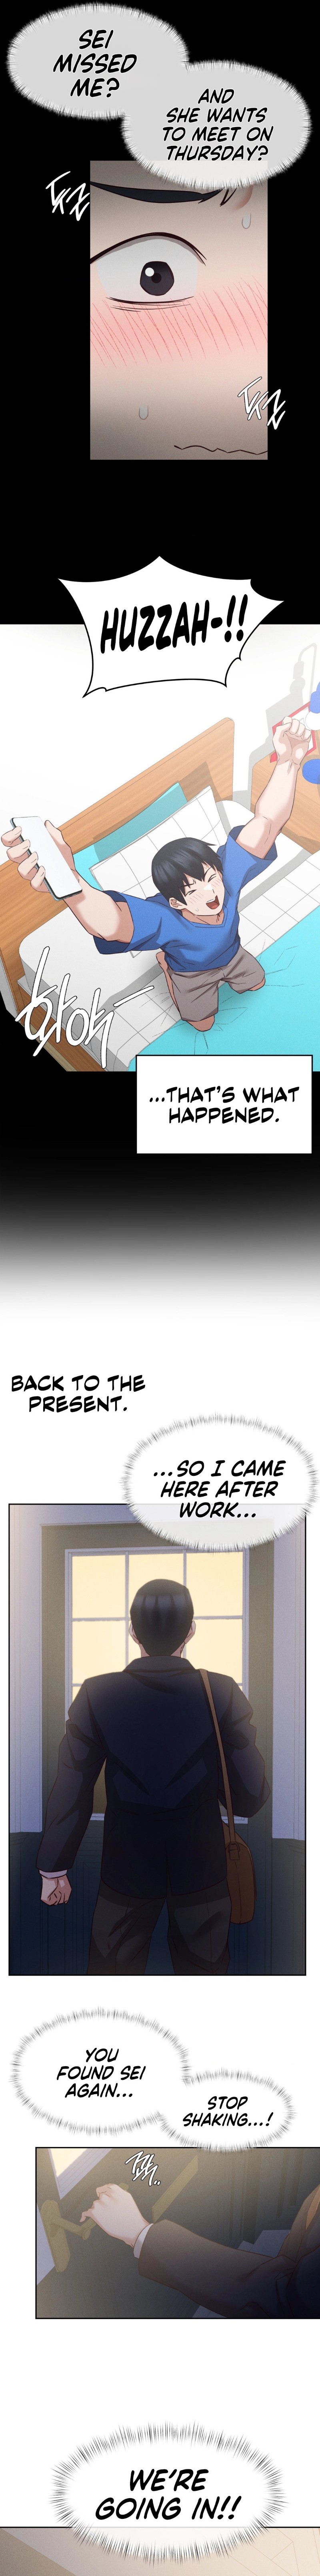 Shall We Go To The Ryokan Together? - Chapter 8 Page 5